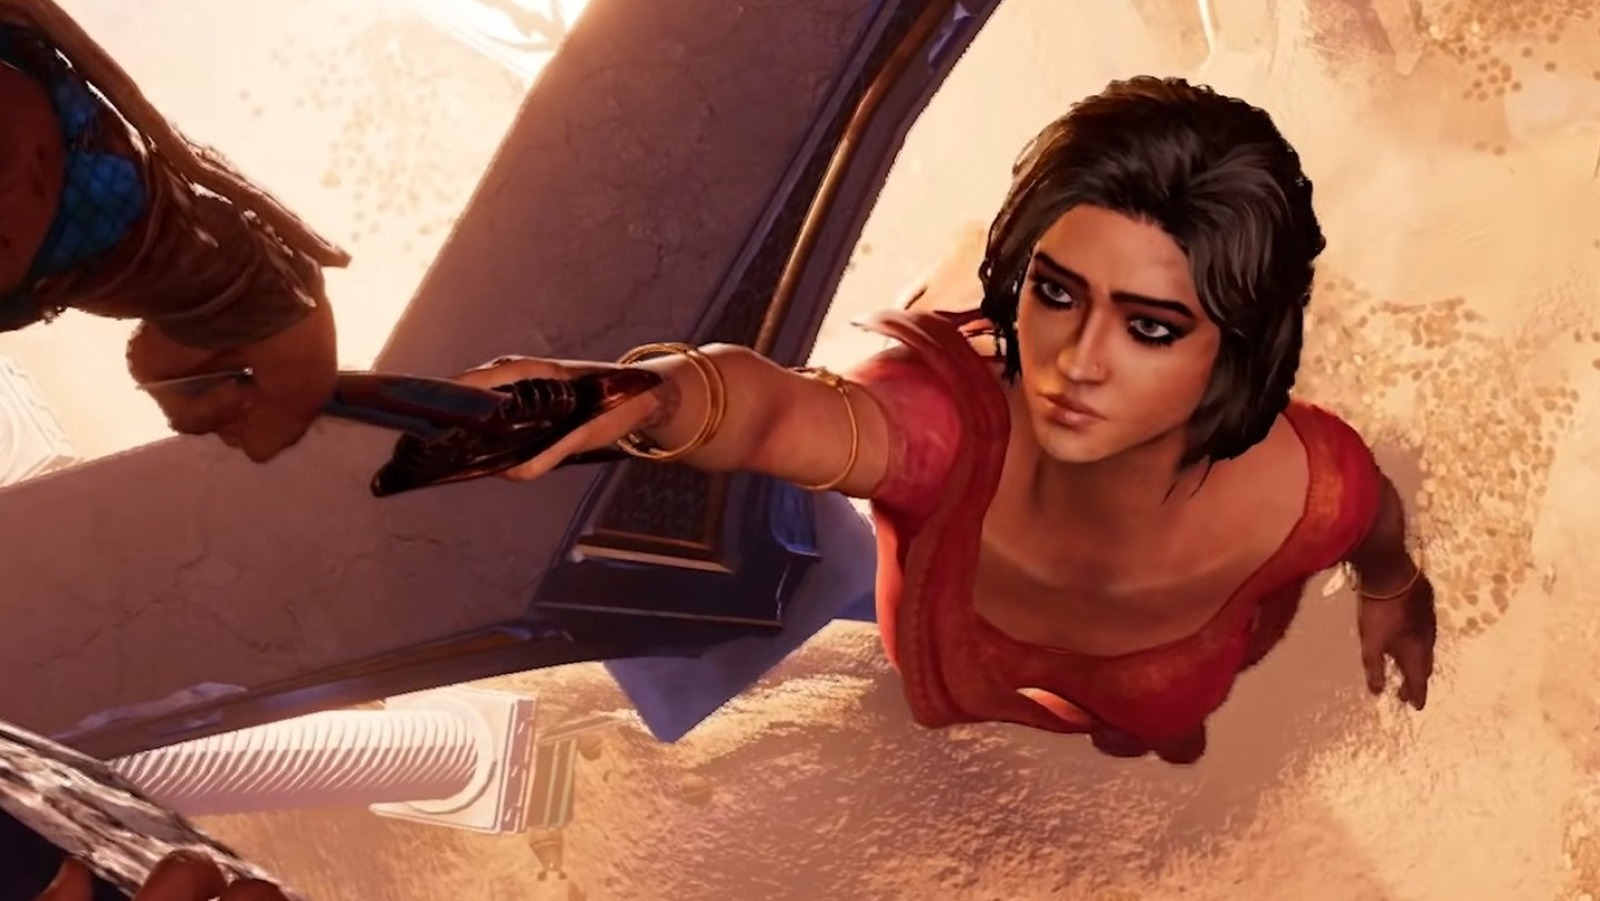 The Prince of Persia: Sands of Time remake has been pushed back